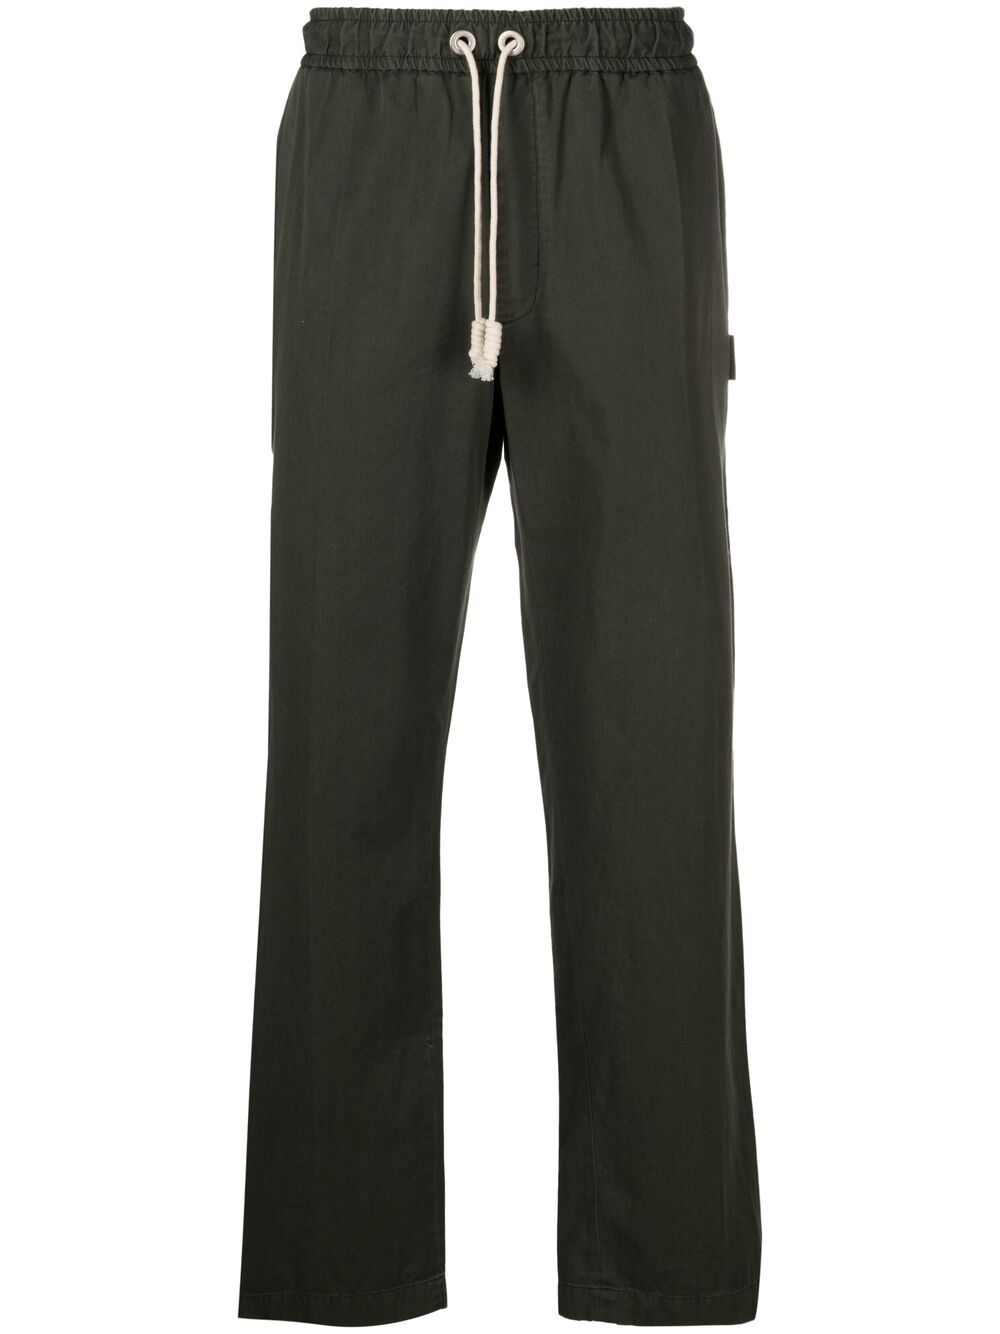 PALM ANGELS SIDE-STRAP DRAWSTRING TROUSERS